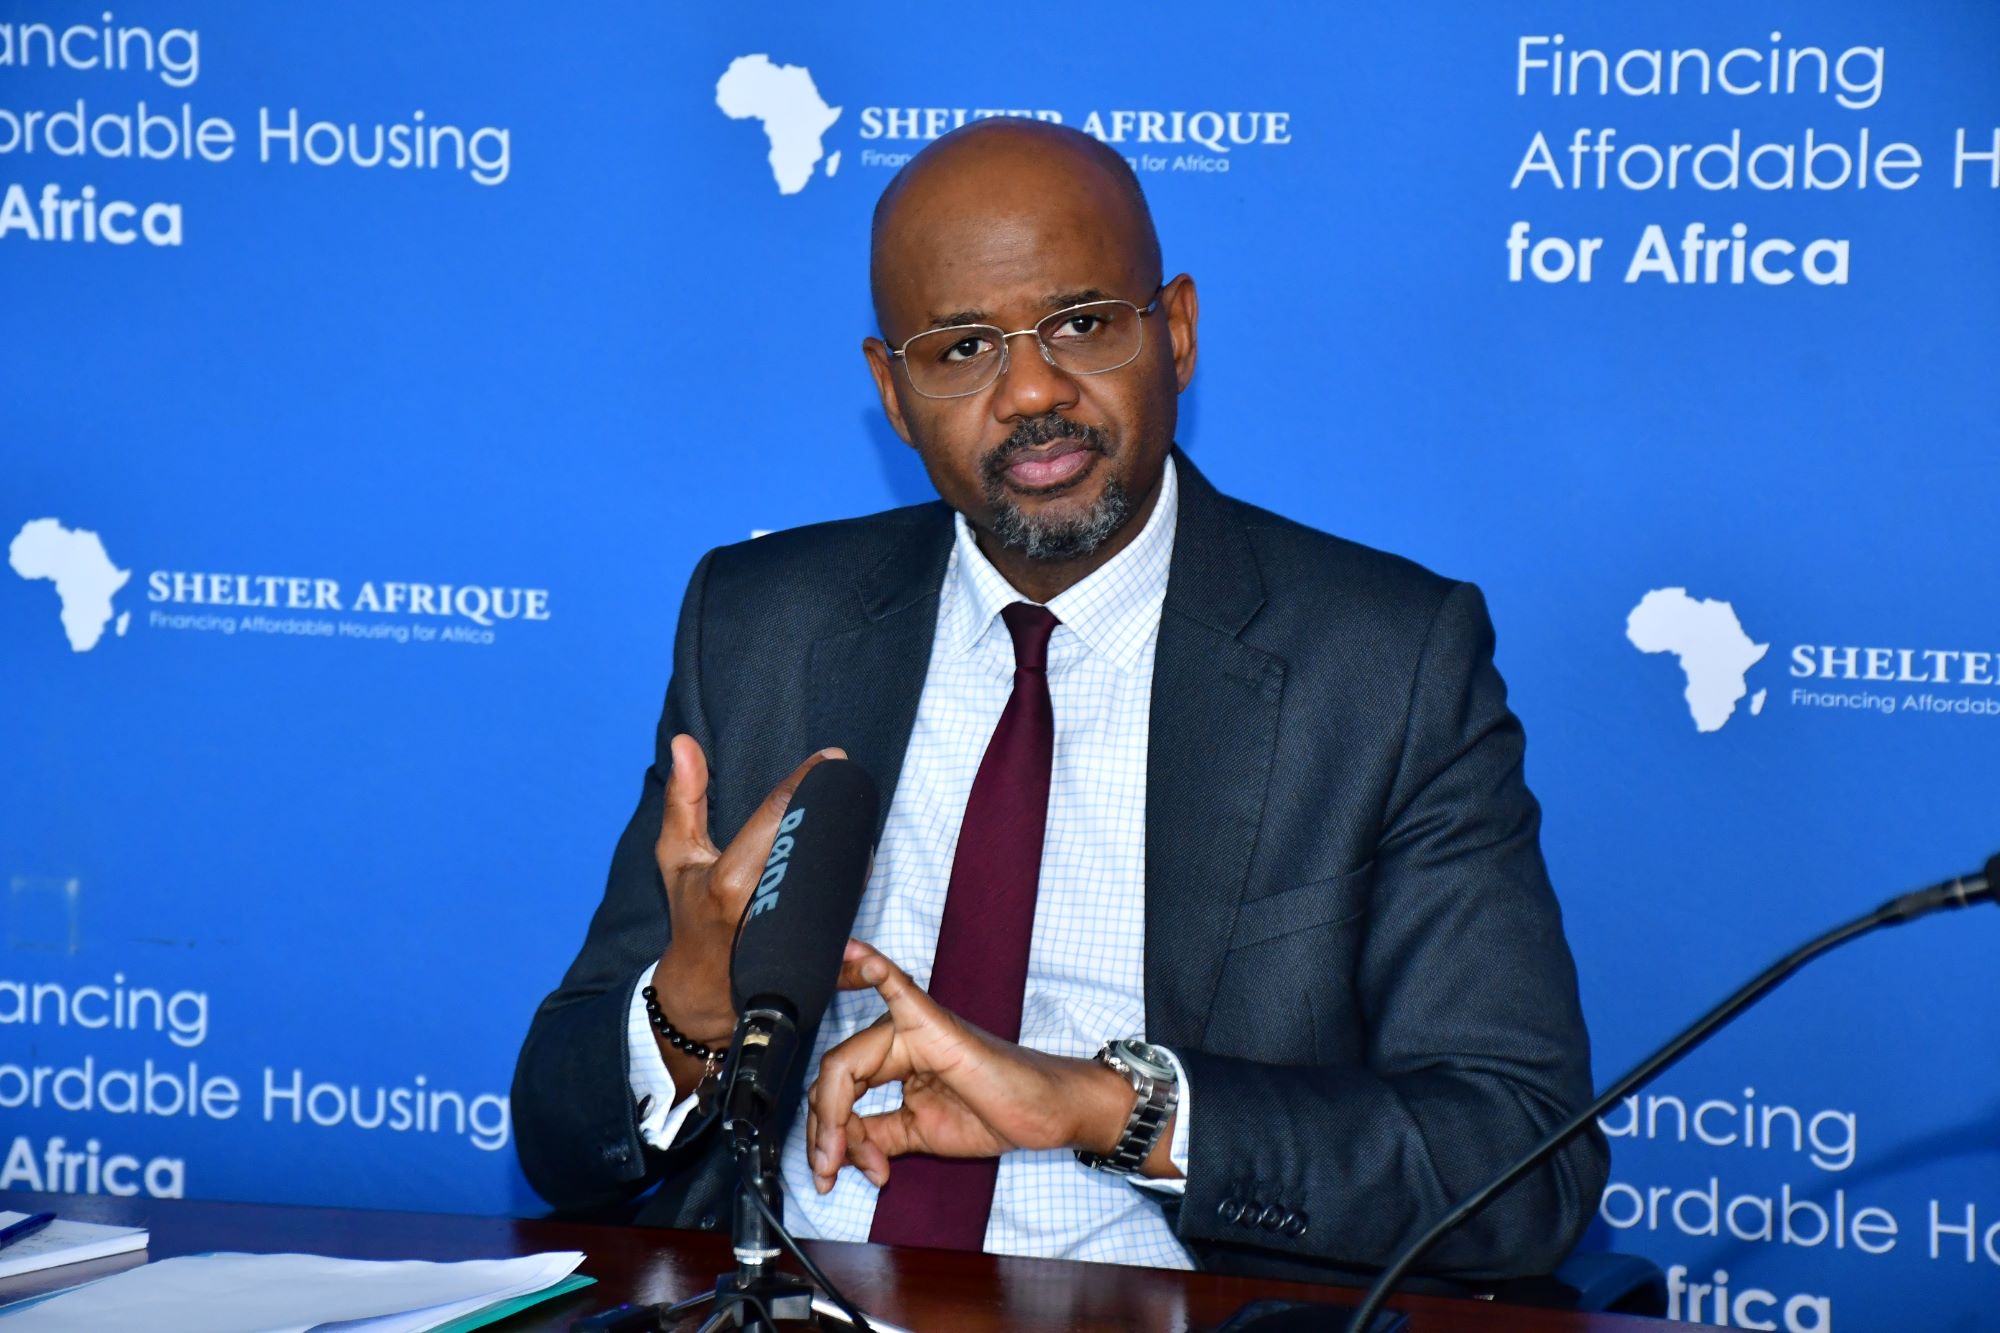 ShafDB welcomes formation of Finance Caucus to drive continent’s housing agenda